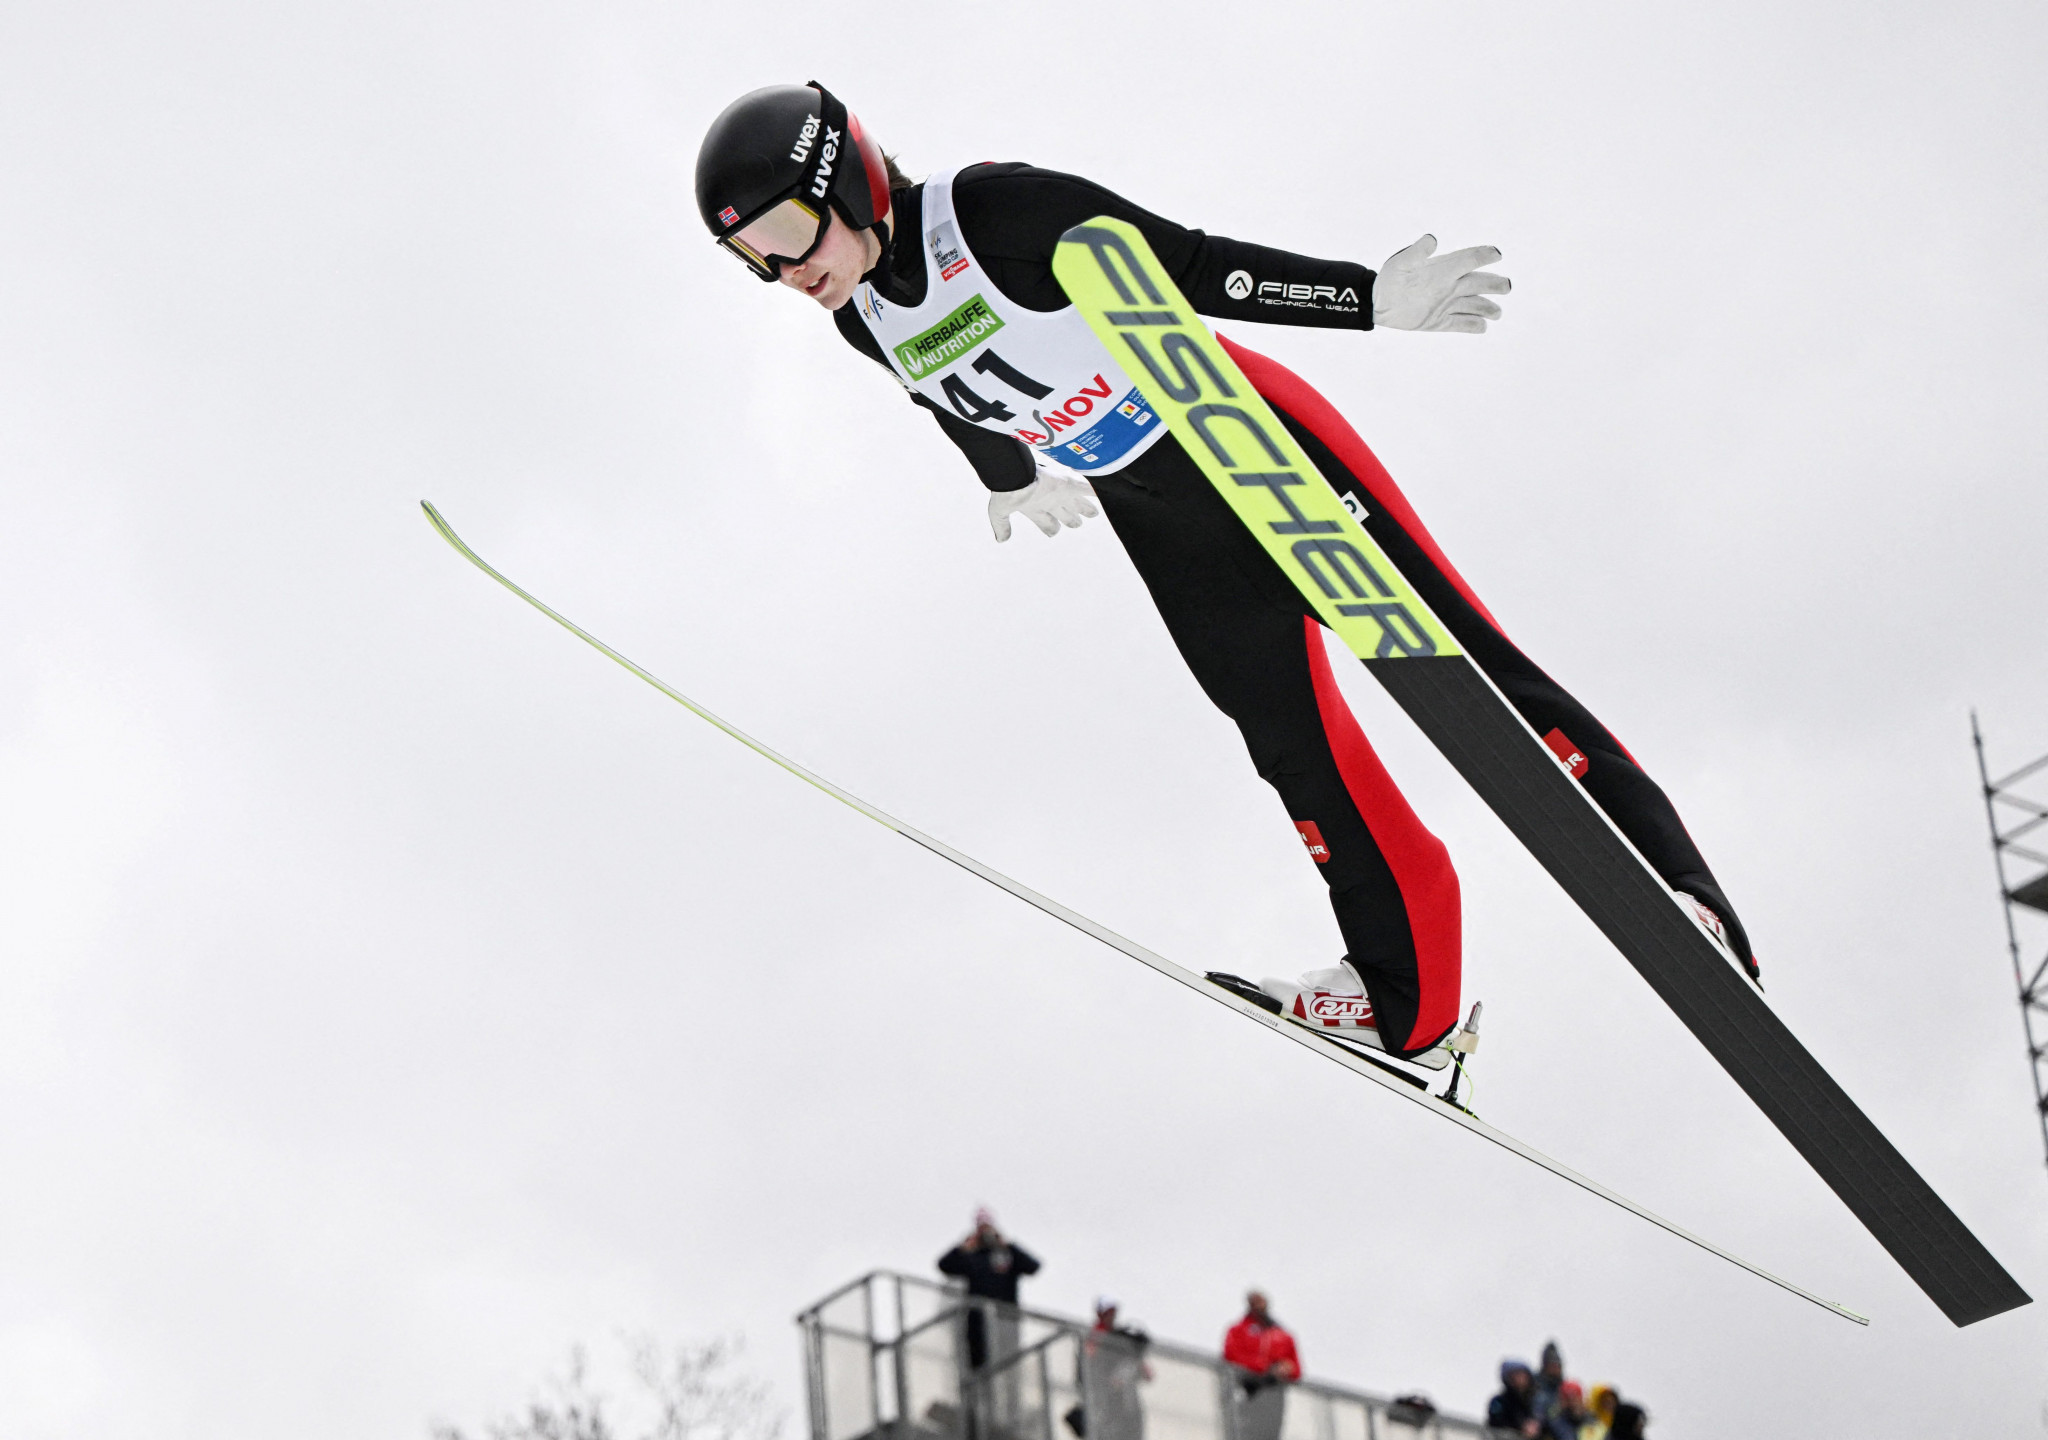 Norway's Anna Odine Strøm claimed her third women's Ski Jumping World Cup win of the season ©Getty Images